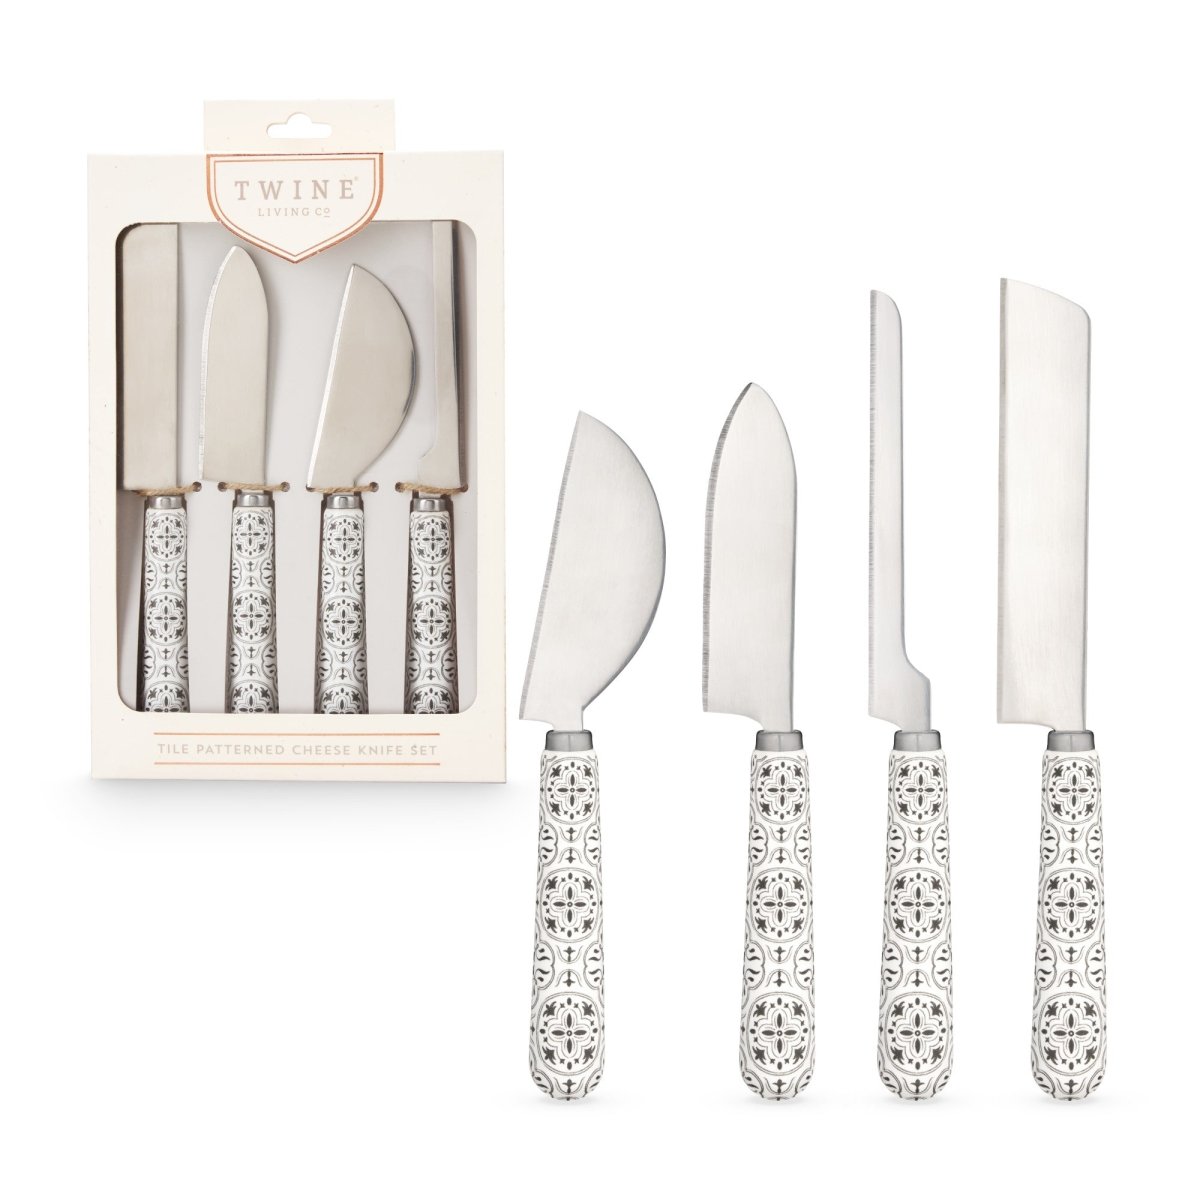 Twine Tiles Stainless Steel Cheese Knife Set - lily & onyx